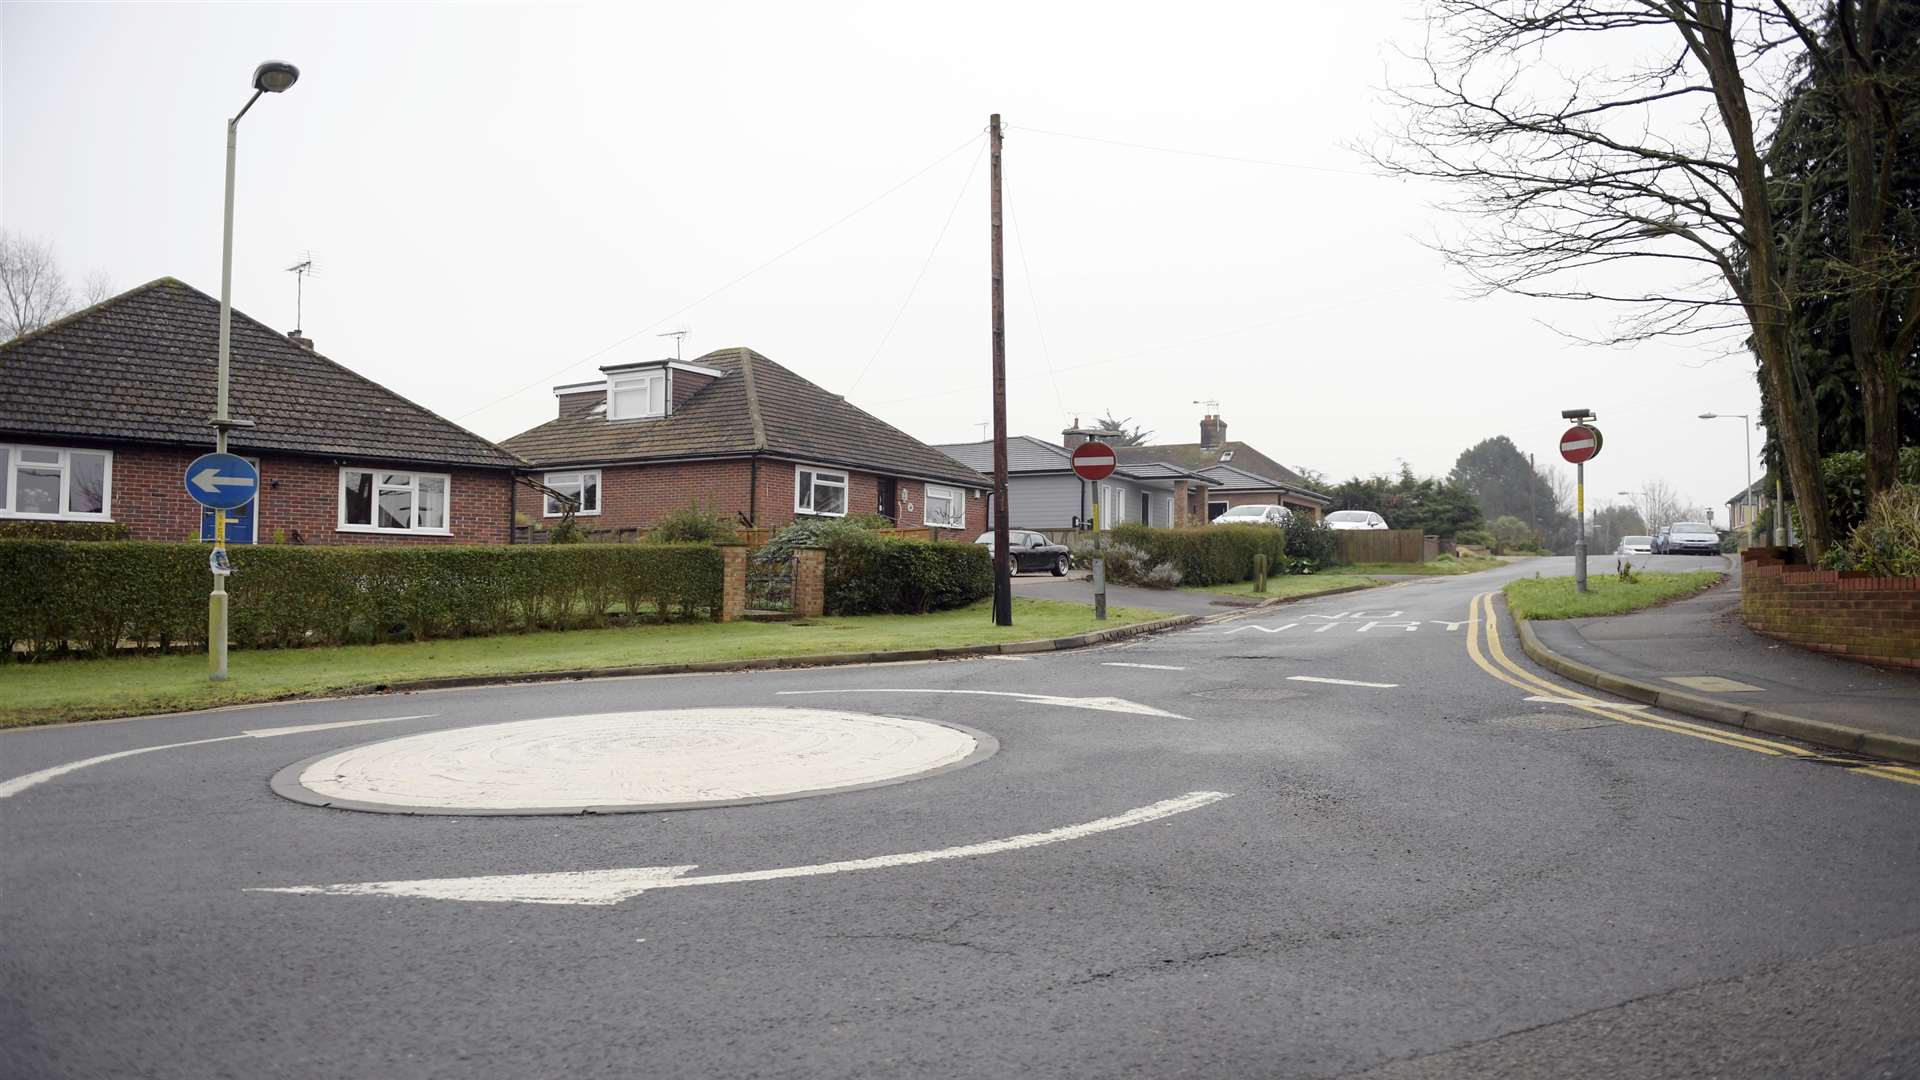 Mr Staddon lives close to the mini-roundabout. Picture: Barry Goodwin